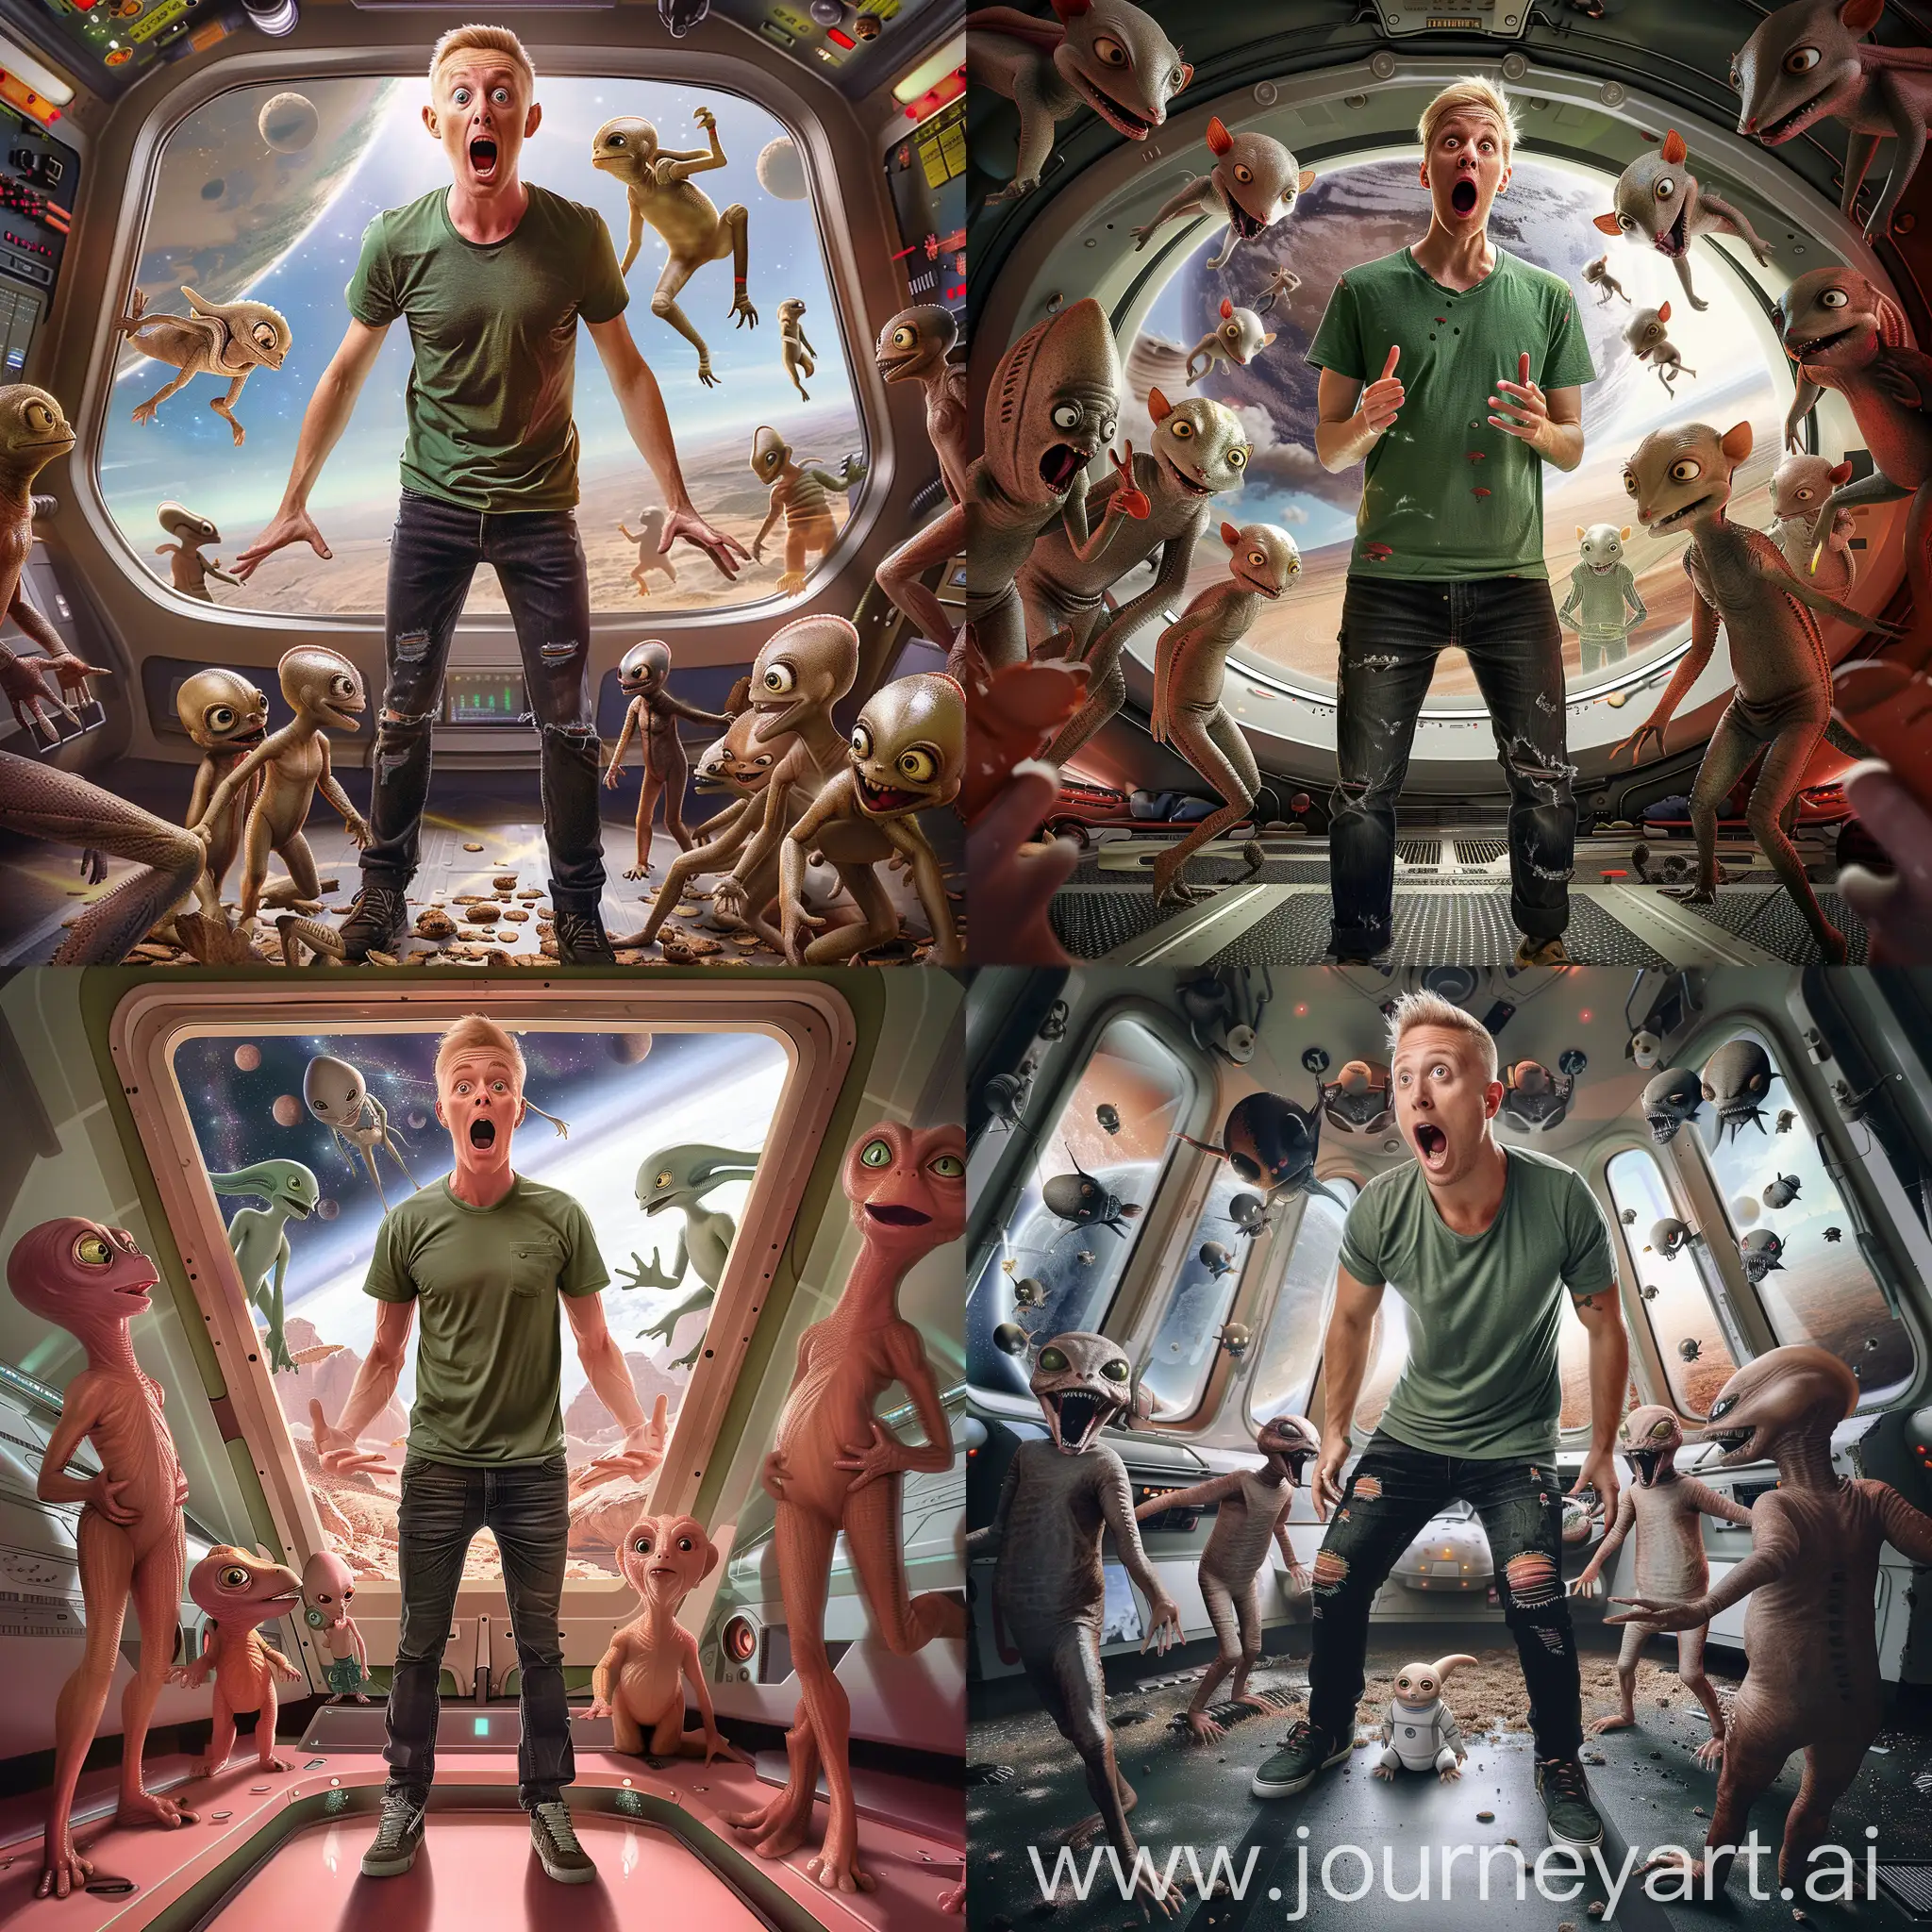 photorealistic image, thirty-year-old Australian man, short blond hair, green t-shirt and black jeans, expression of amazement, standing in a spaceship, surrounded by cute aliens, wide window in the background showing outer space